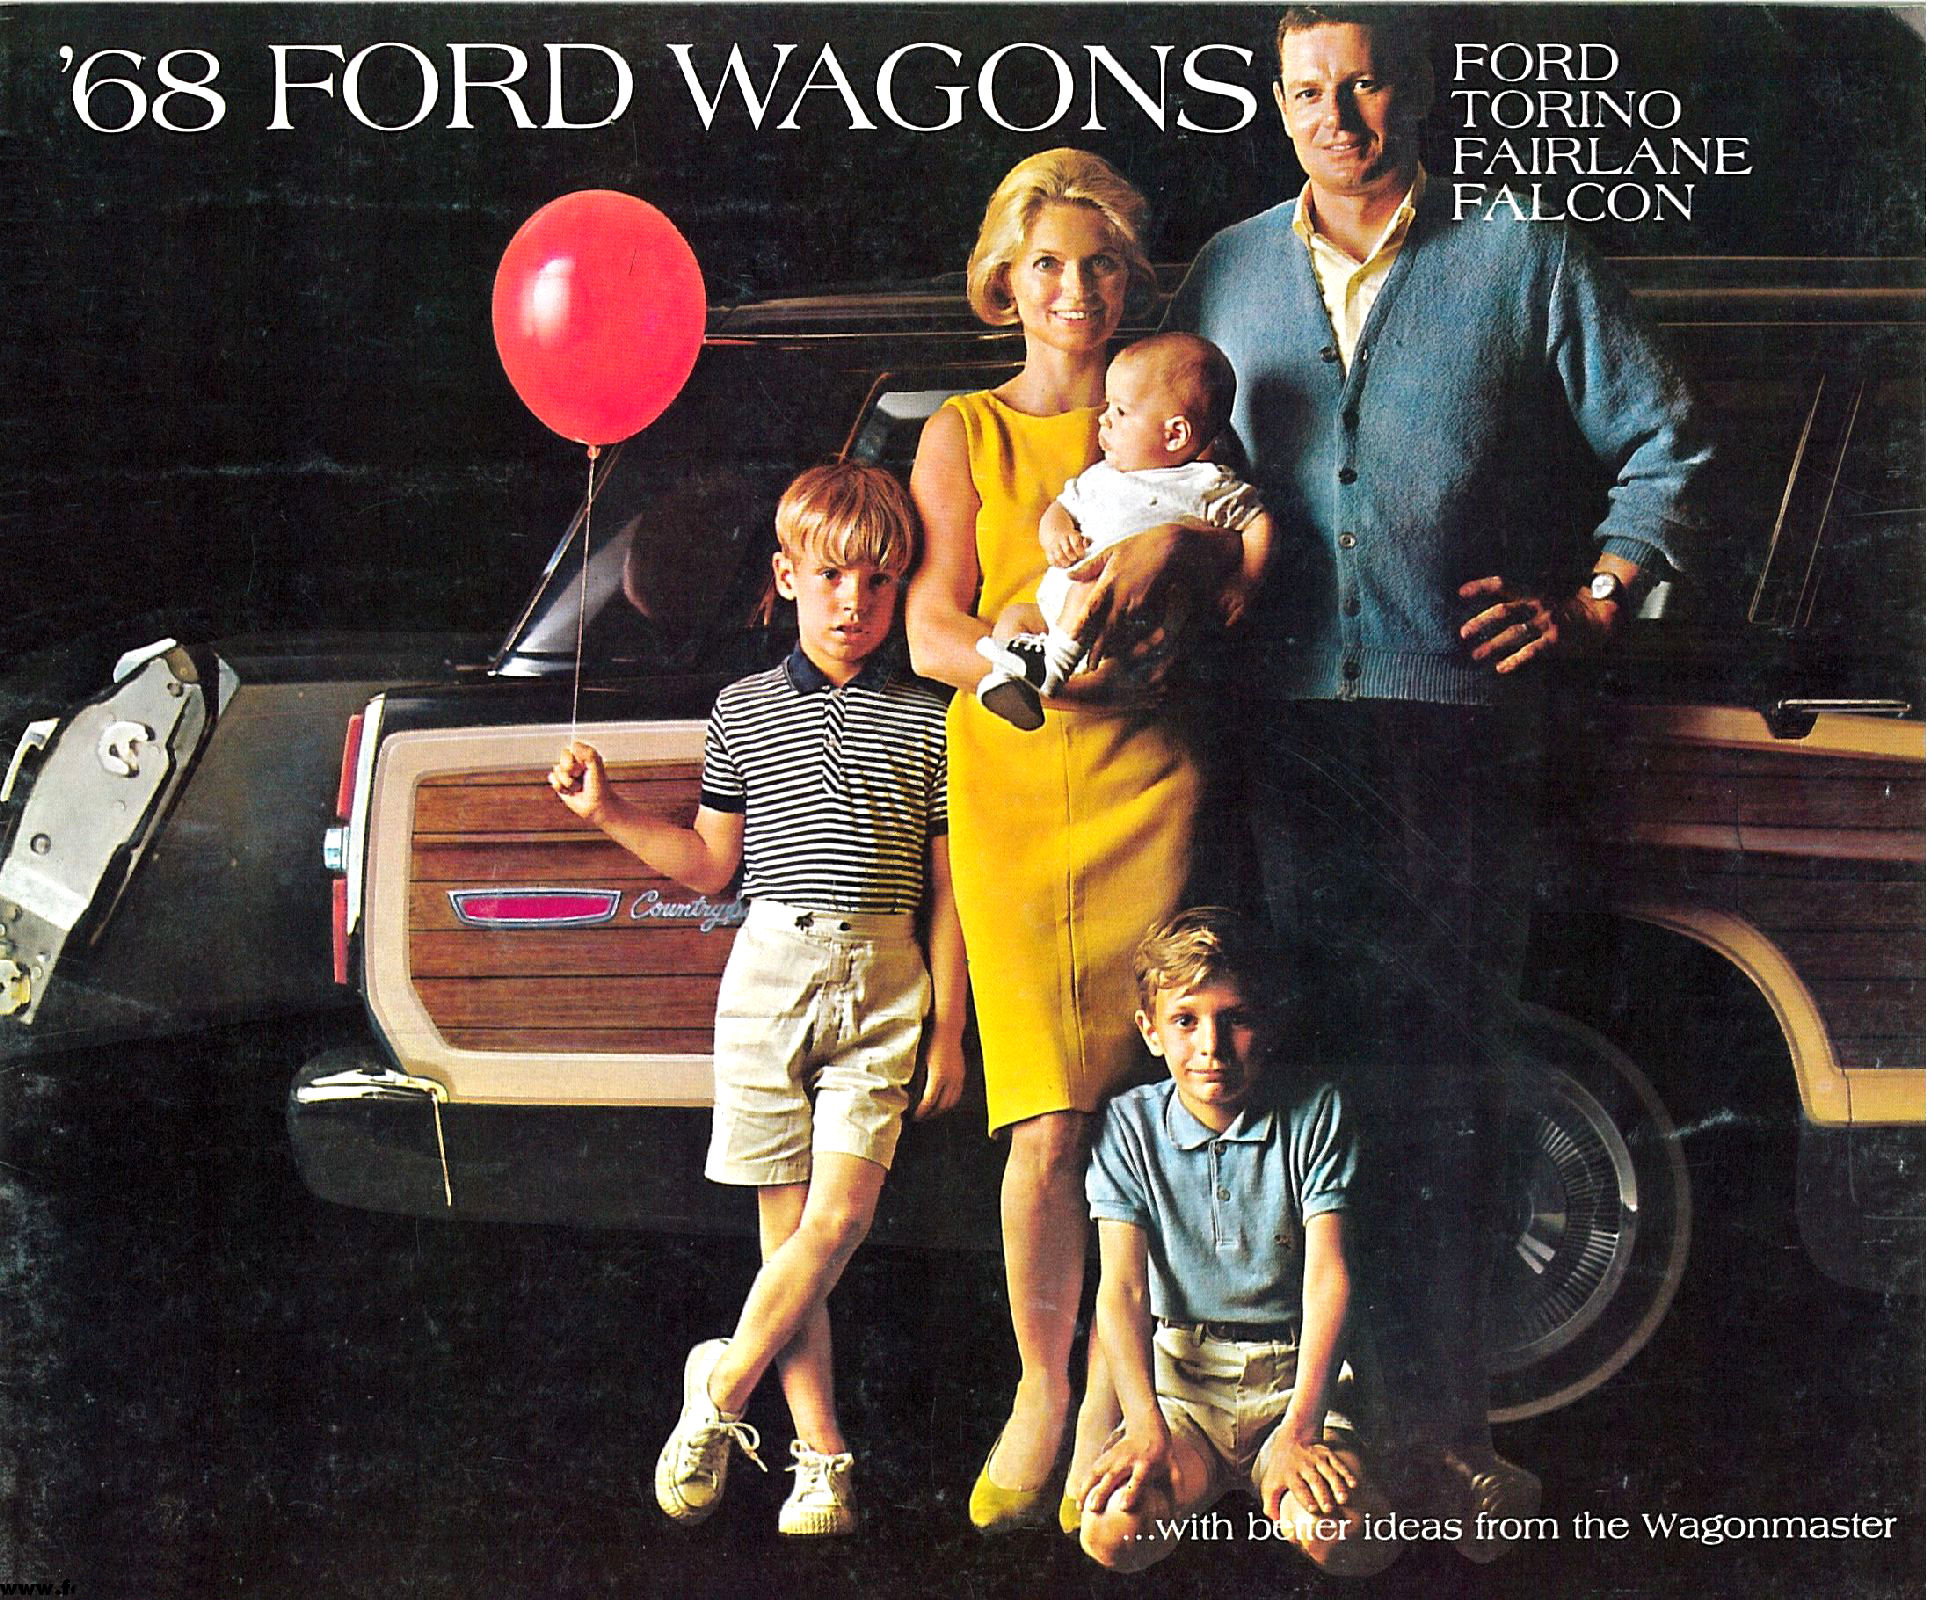 1968 Ford Wagons-01